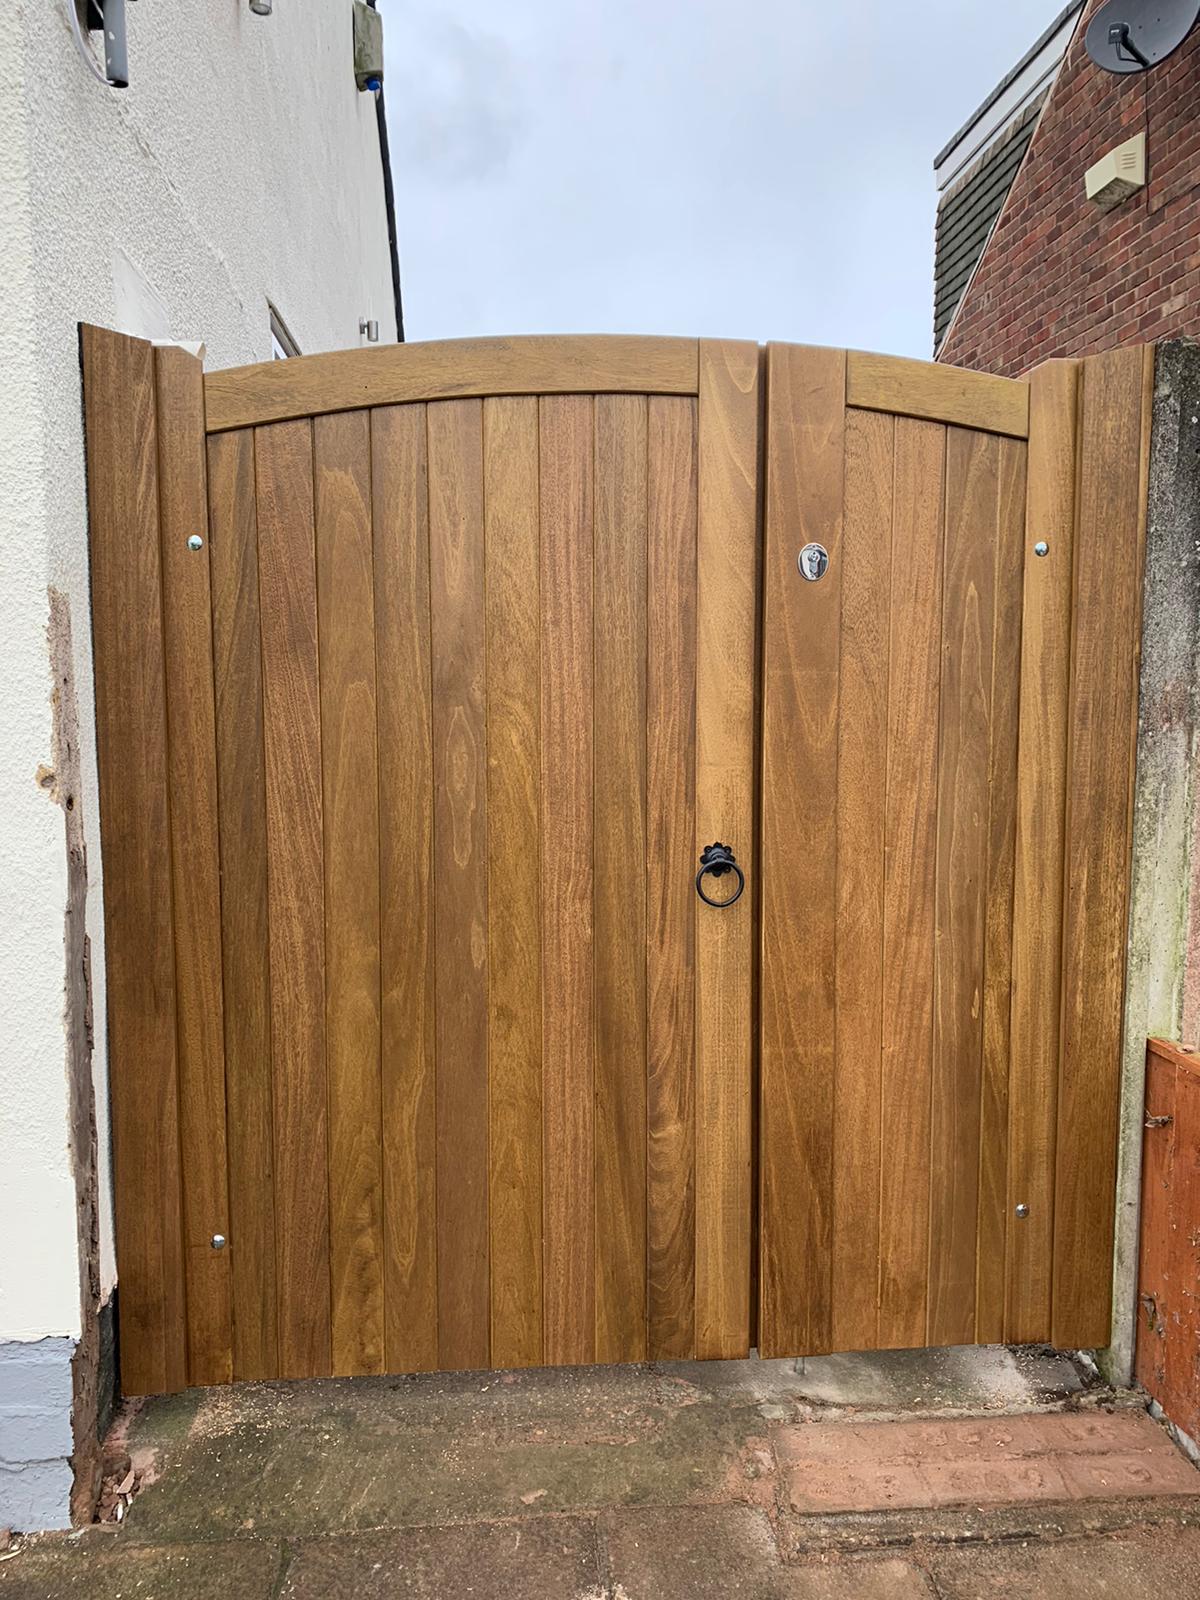 Idigbo Lymm Design With Gate Panel Mid Oak Stain Front